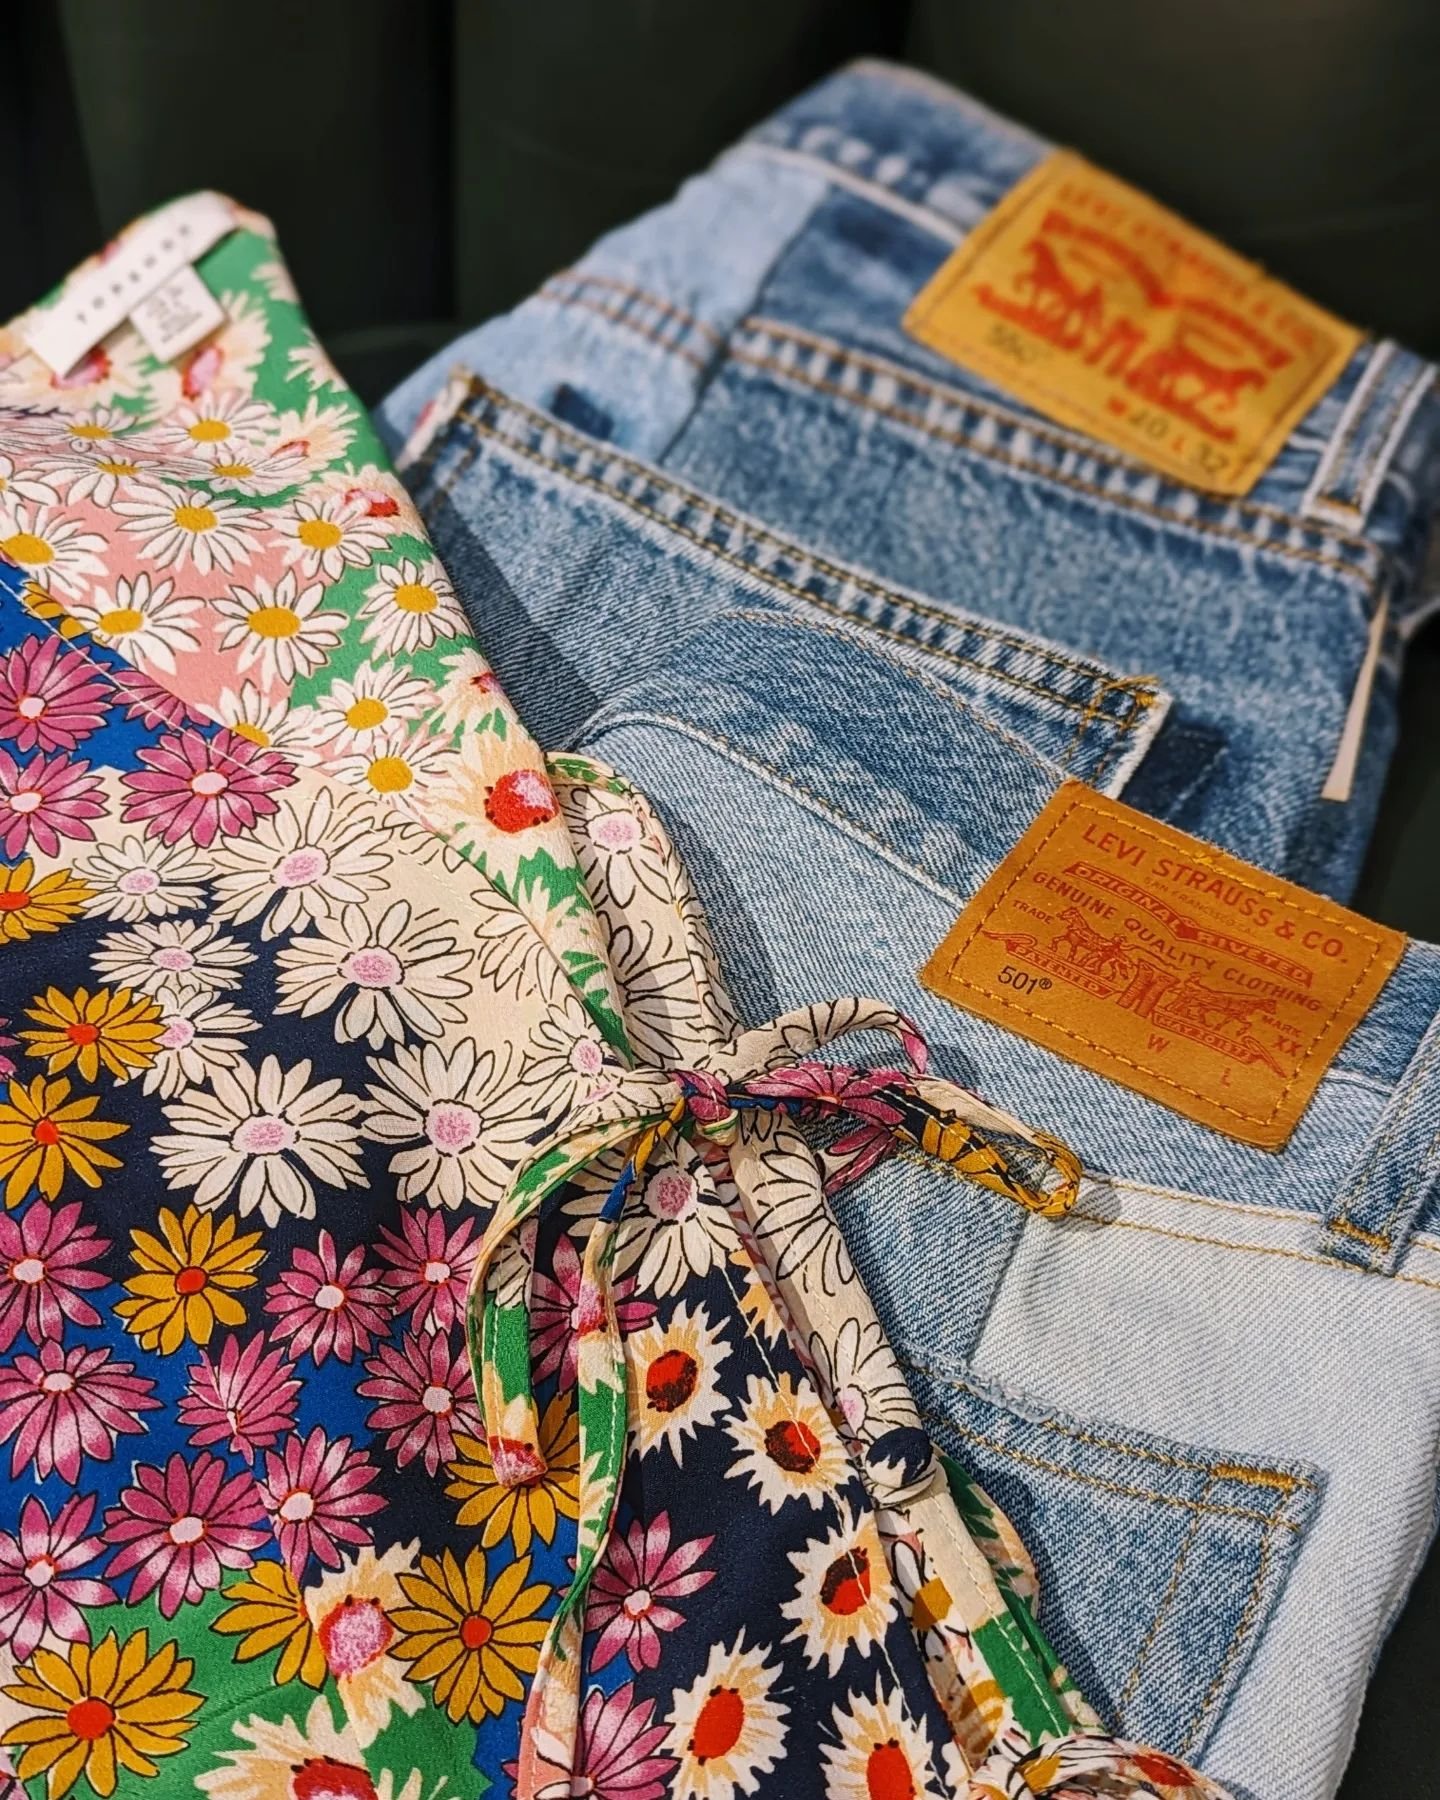 Looks like a beautiful week in Kelowna!
Can never go wrong with denim + florals 🌼🌼🌼

#shoplocal
#shopsmall 
#consignment
#downtownkelowna 
#levis #secondhand